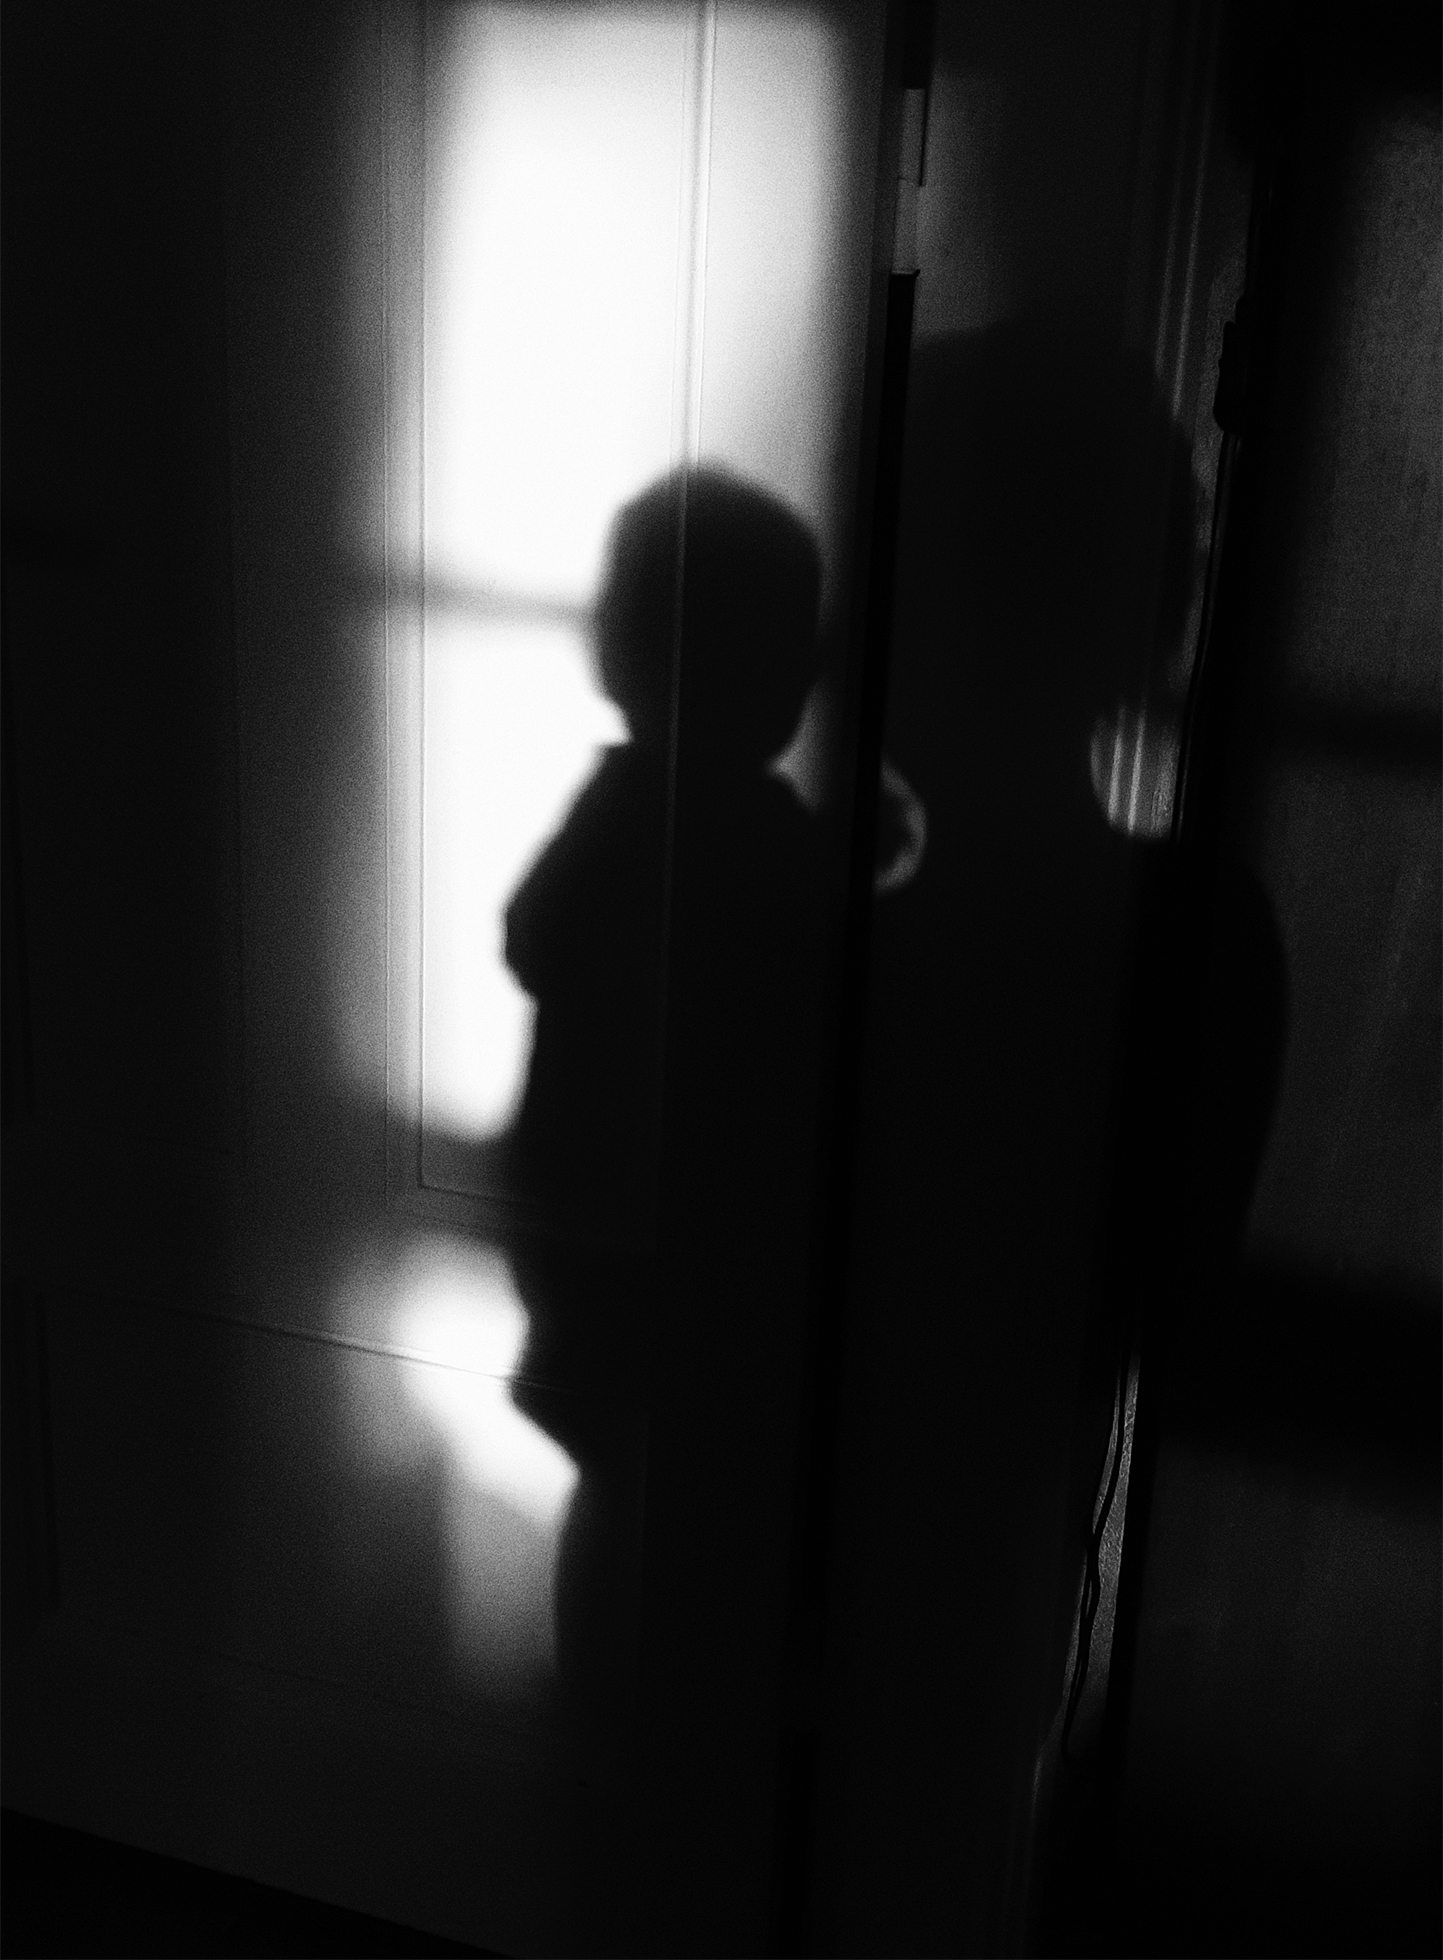 The silhouette of a woman standing and holding a small child seen from behind. The image is dark, but there is light from a large window in front of the woman and child.